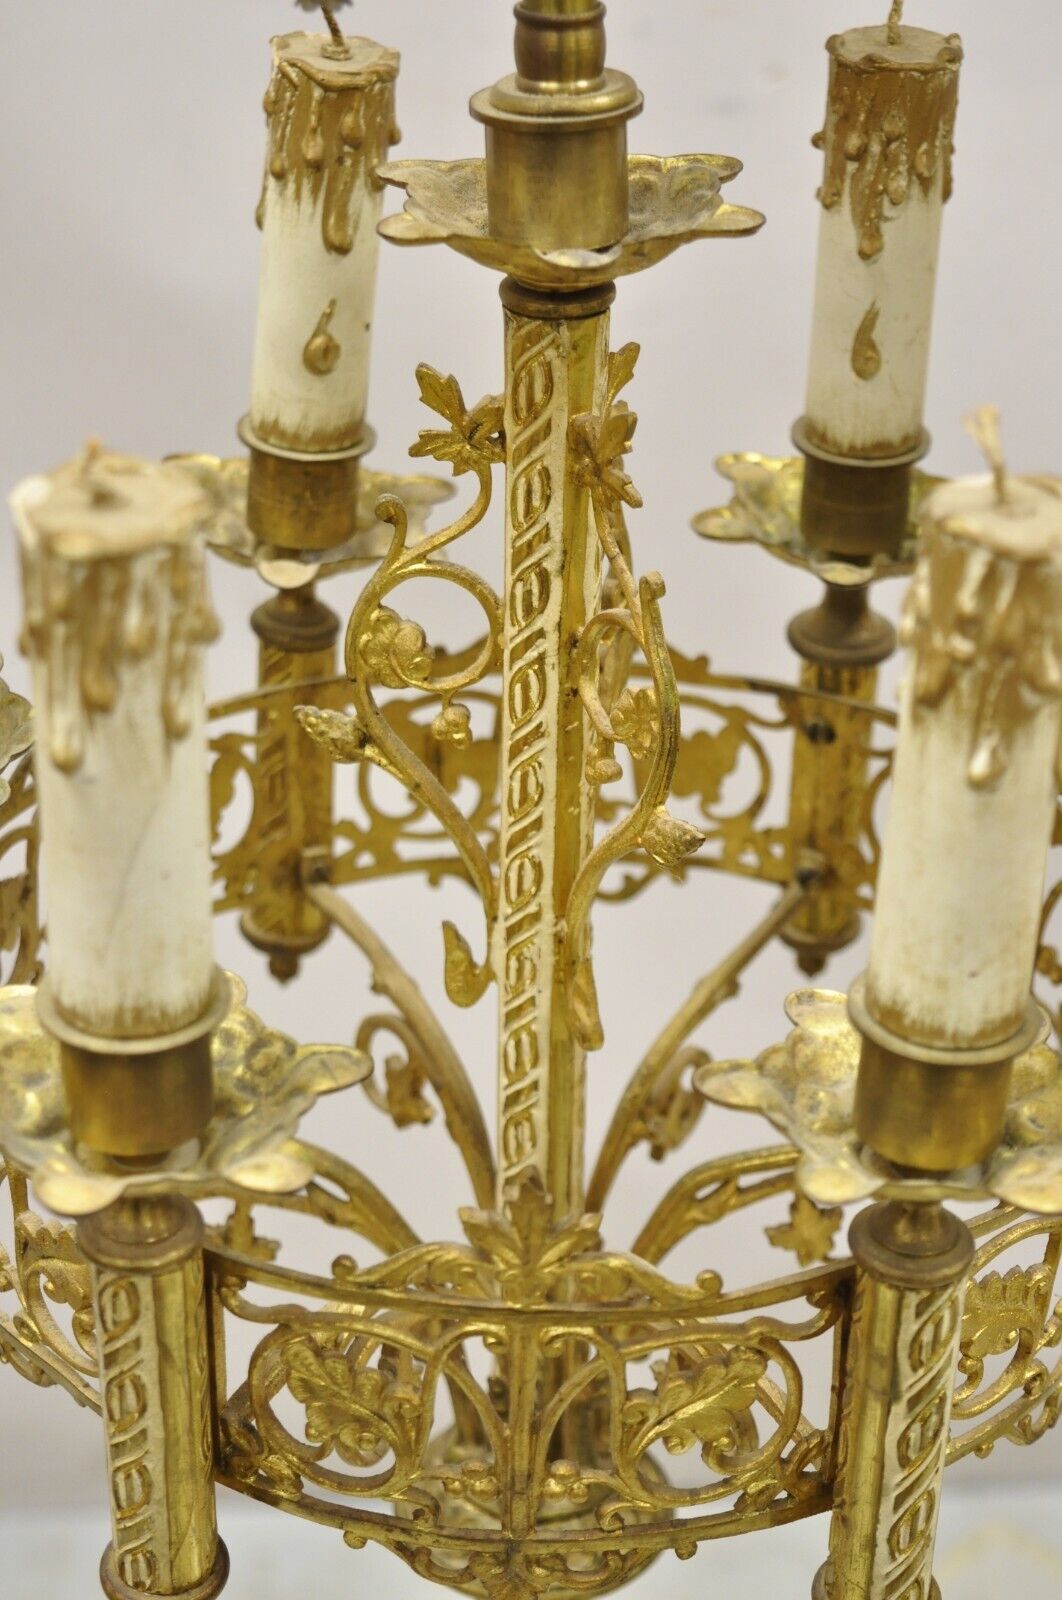 Antique Gothic Revival Gold Bronze Figural Candelabra Table Lamps - a Pair